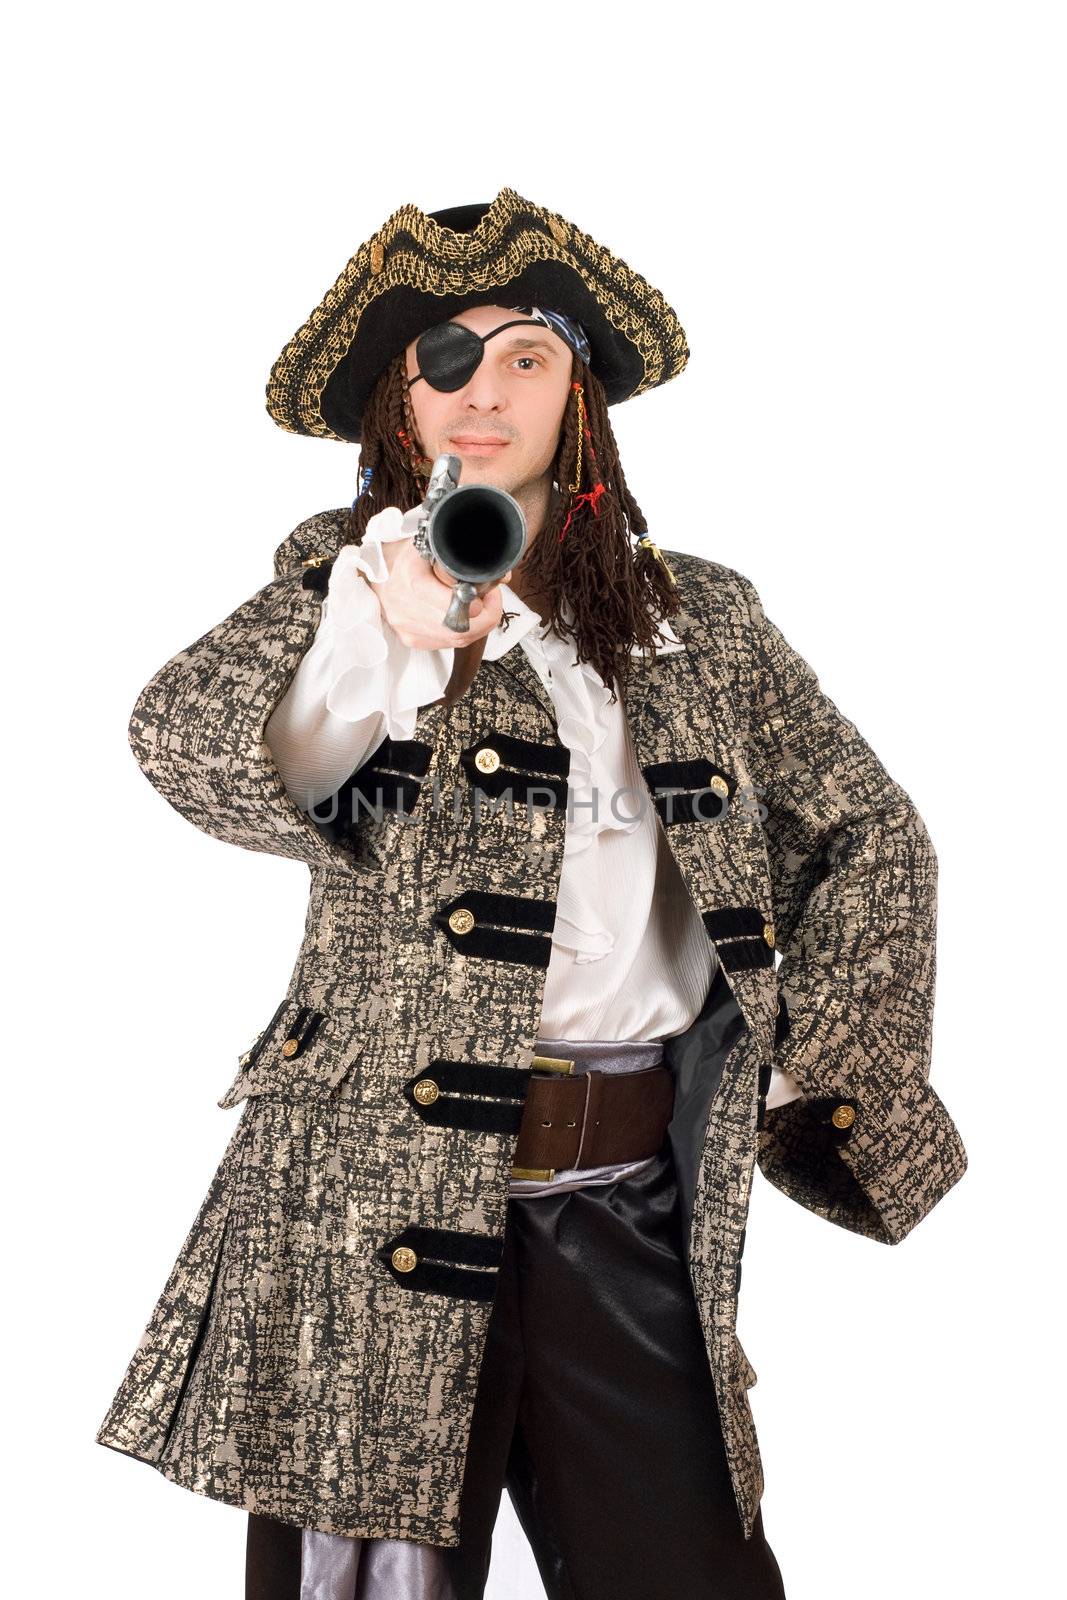 Portrait of man in a pirate costume with pistol. Isolated